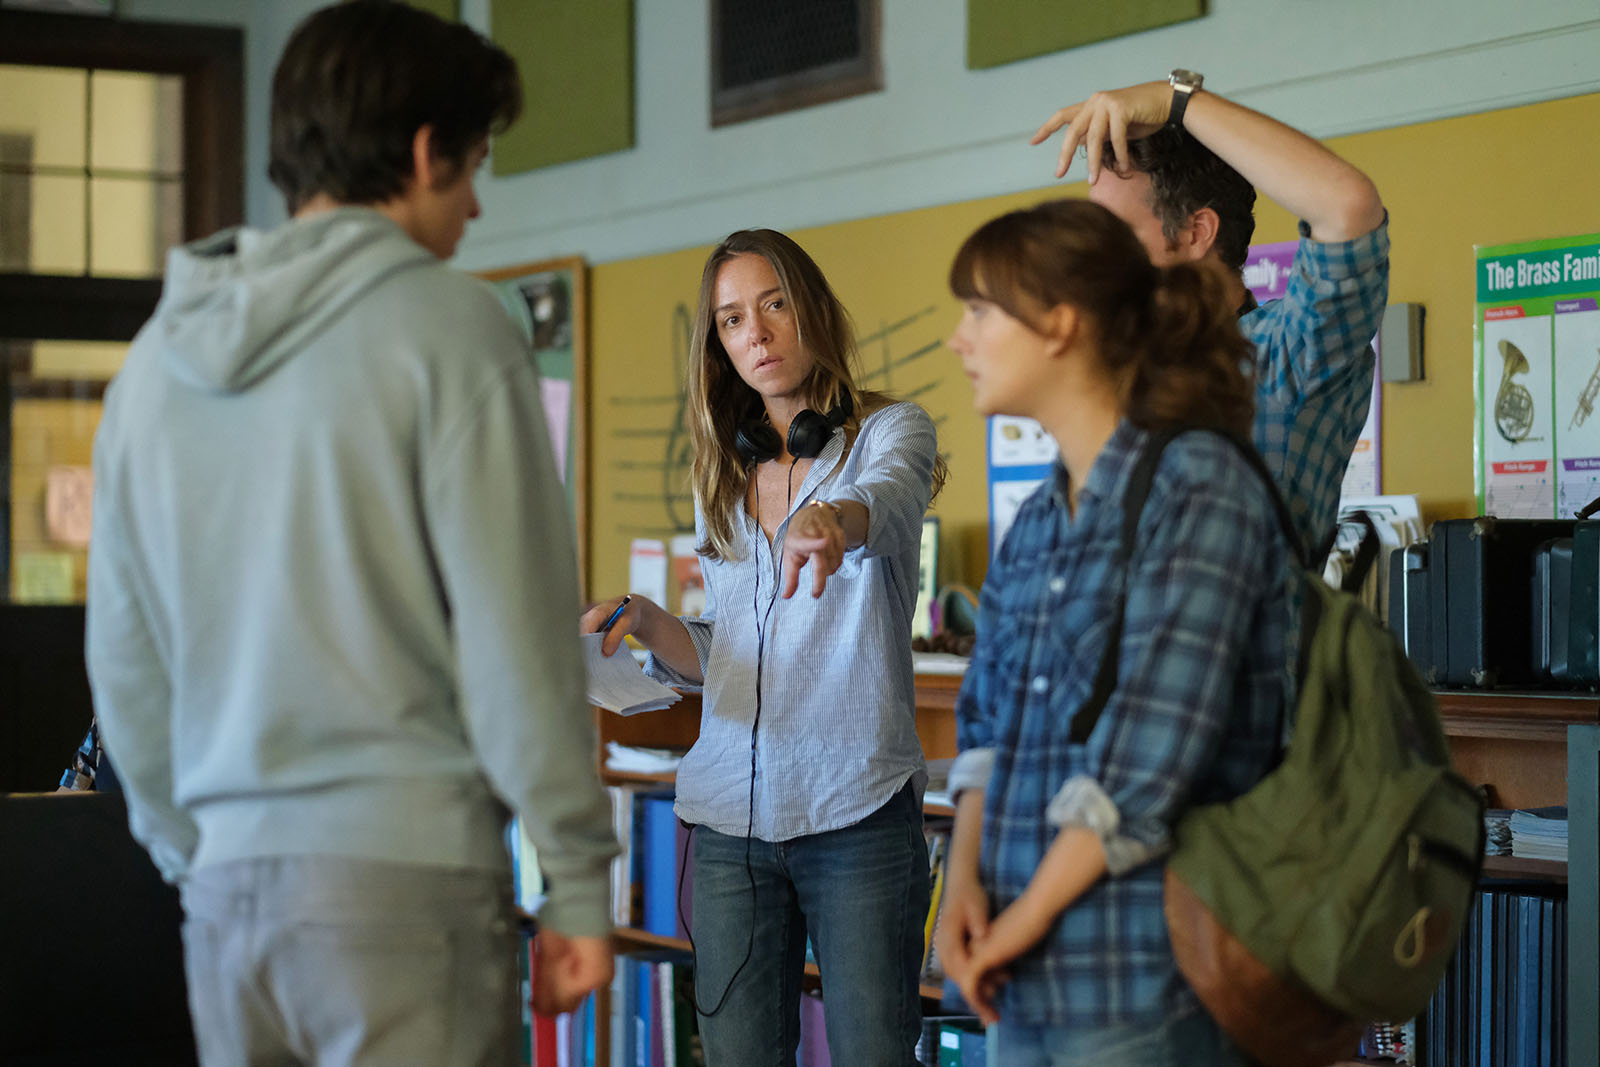 Director Sian Heder (middle) with Daniel Durant (left) and Emilia Jones (right) on the set of CODA. Image © Apple TV+